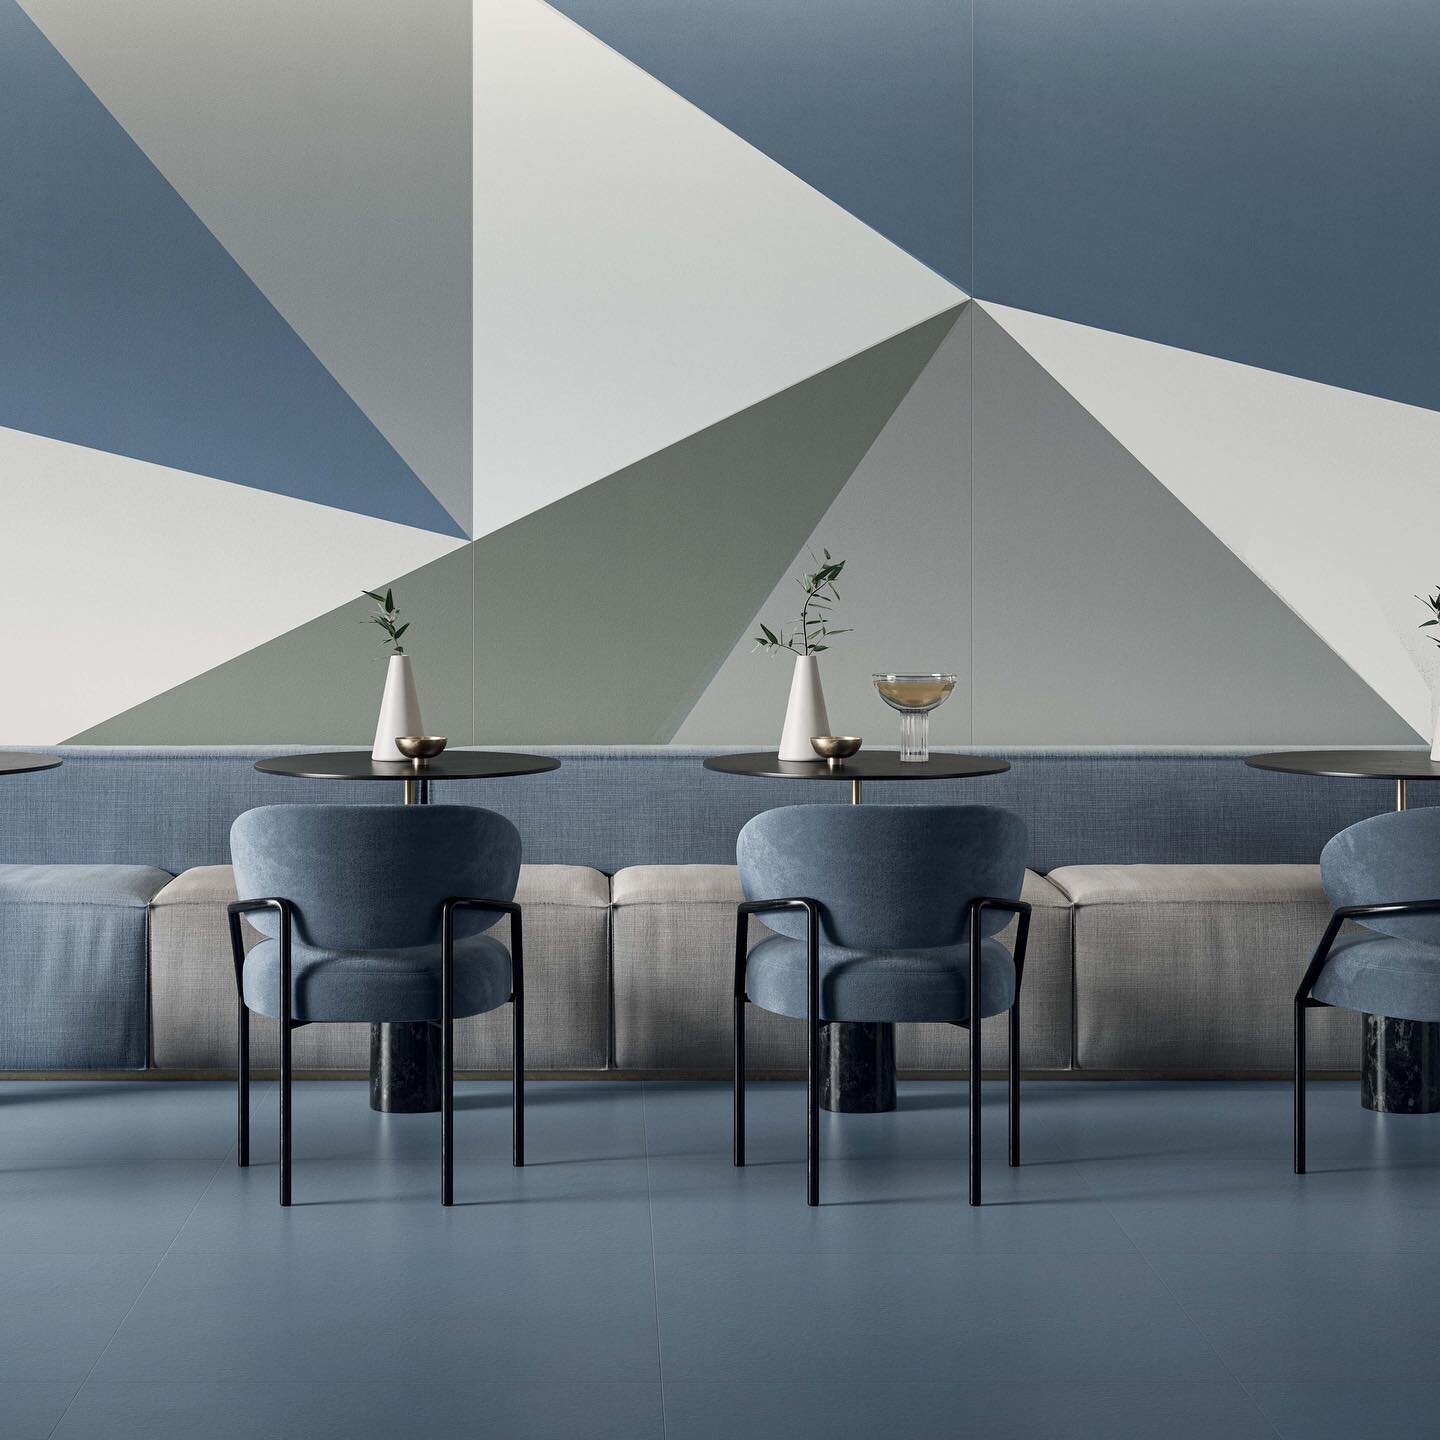 OVERTONE ✨
Porcelain Stoneware | Concrete Look

If you&rsquo;re looking for subtle color in large format, this collection is for you! 

Overtone offers a soft concrete feel in 11 simple chromatic color options. 

Available in stock in Cielo (blue) an